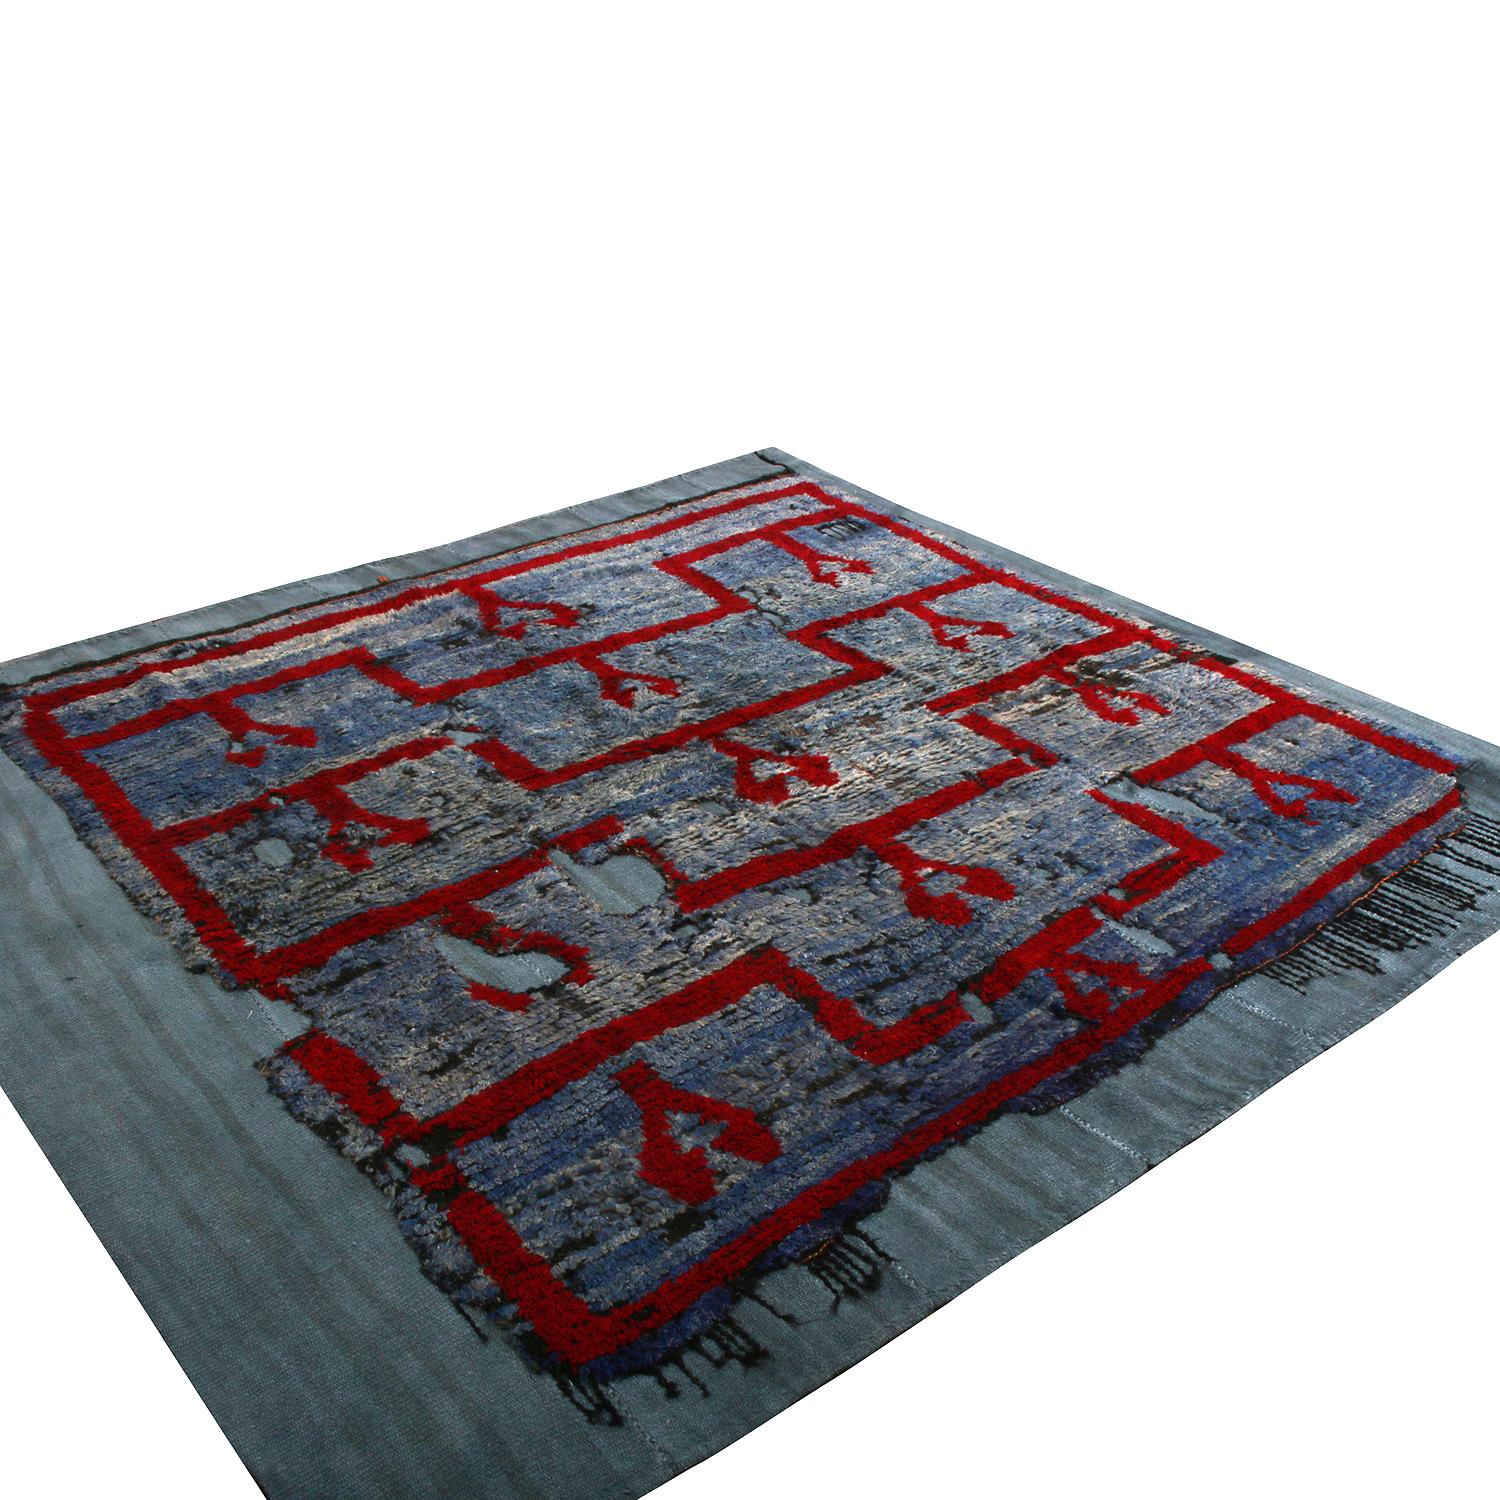 A unique 6x7 kilim rug from our flatweave repertoire playing two pieces on top of each other making a statement piece with a flat base with some pile atop blissfully accompanied by distressed variation further lending to the exclusivity & rarity of